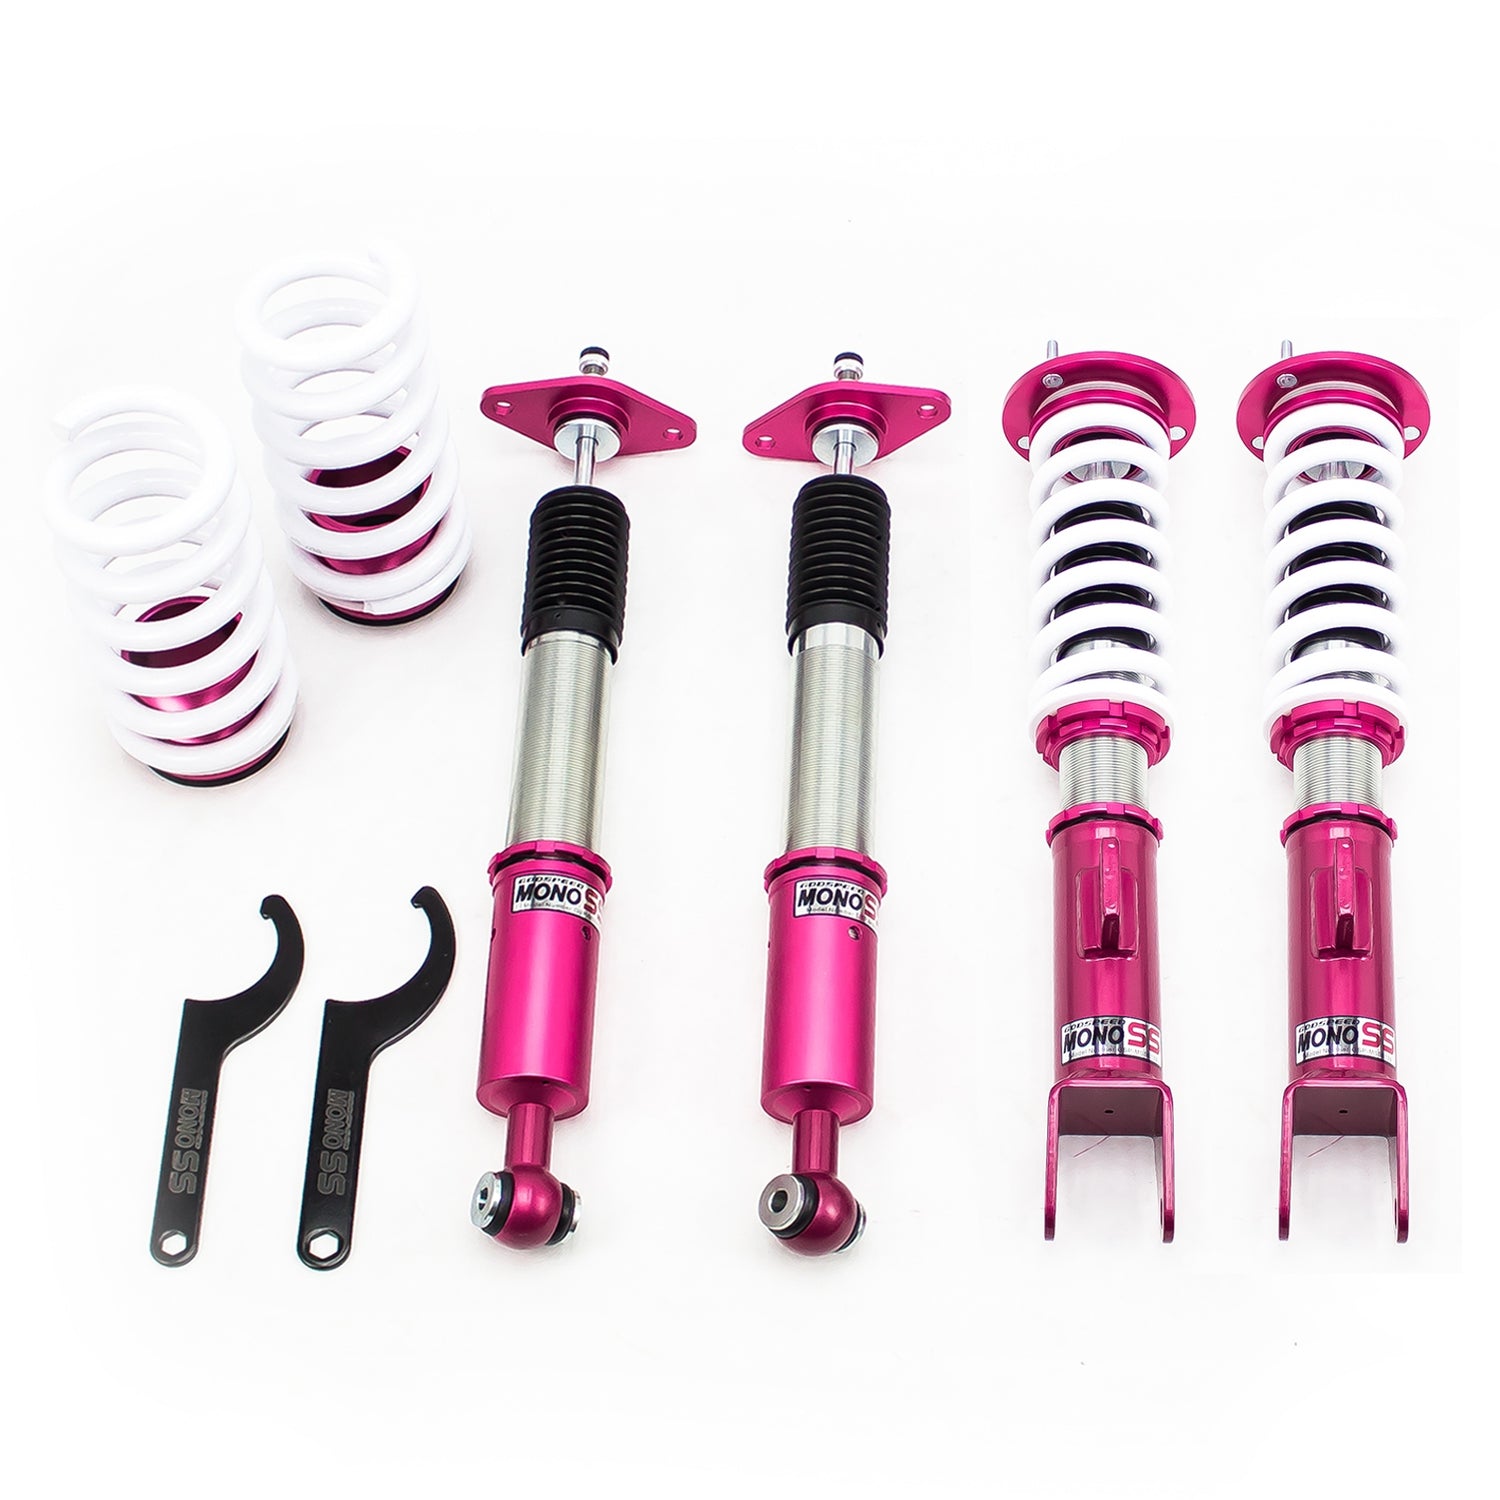 Godspeed MSS0139-A MonoSS Coilover Lowering Kit, Fully Adjustable, Ride Height, Spring Tension And 16 Click Damping, Chrysler 300C RWD 2005-10